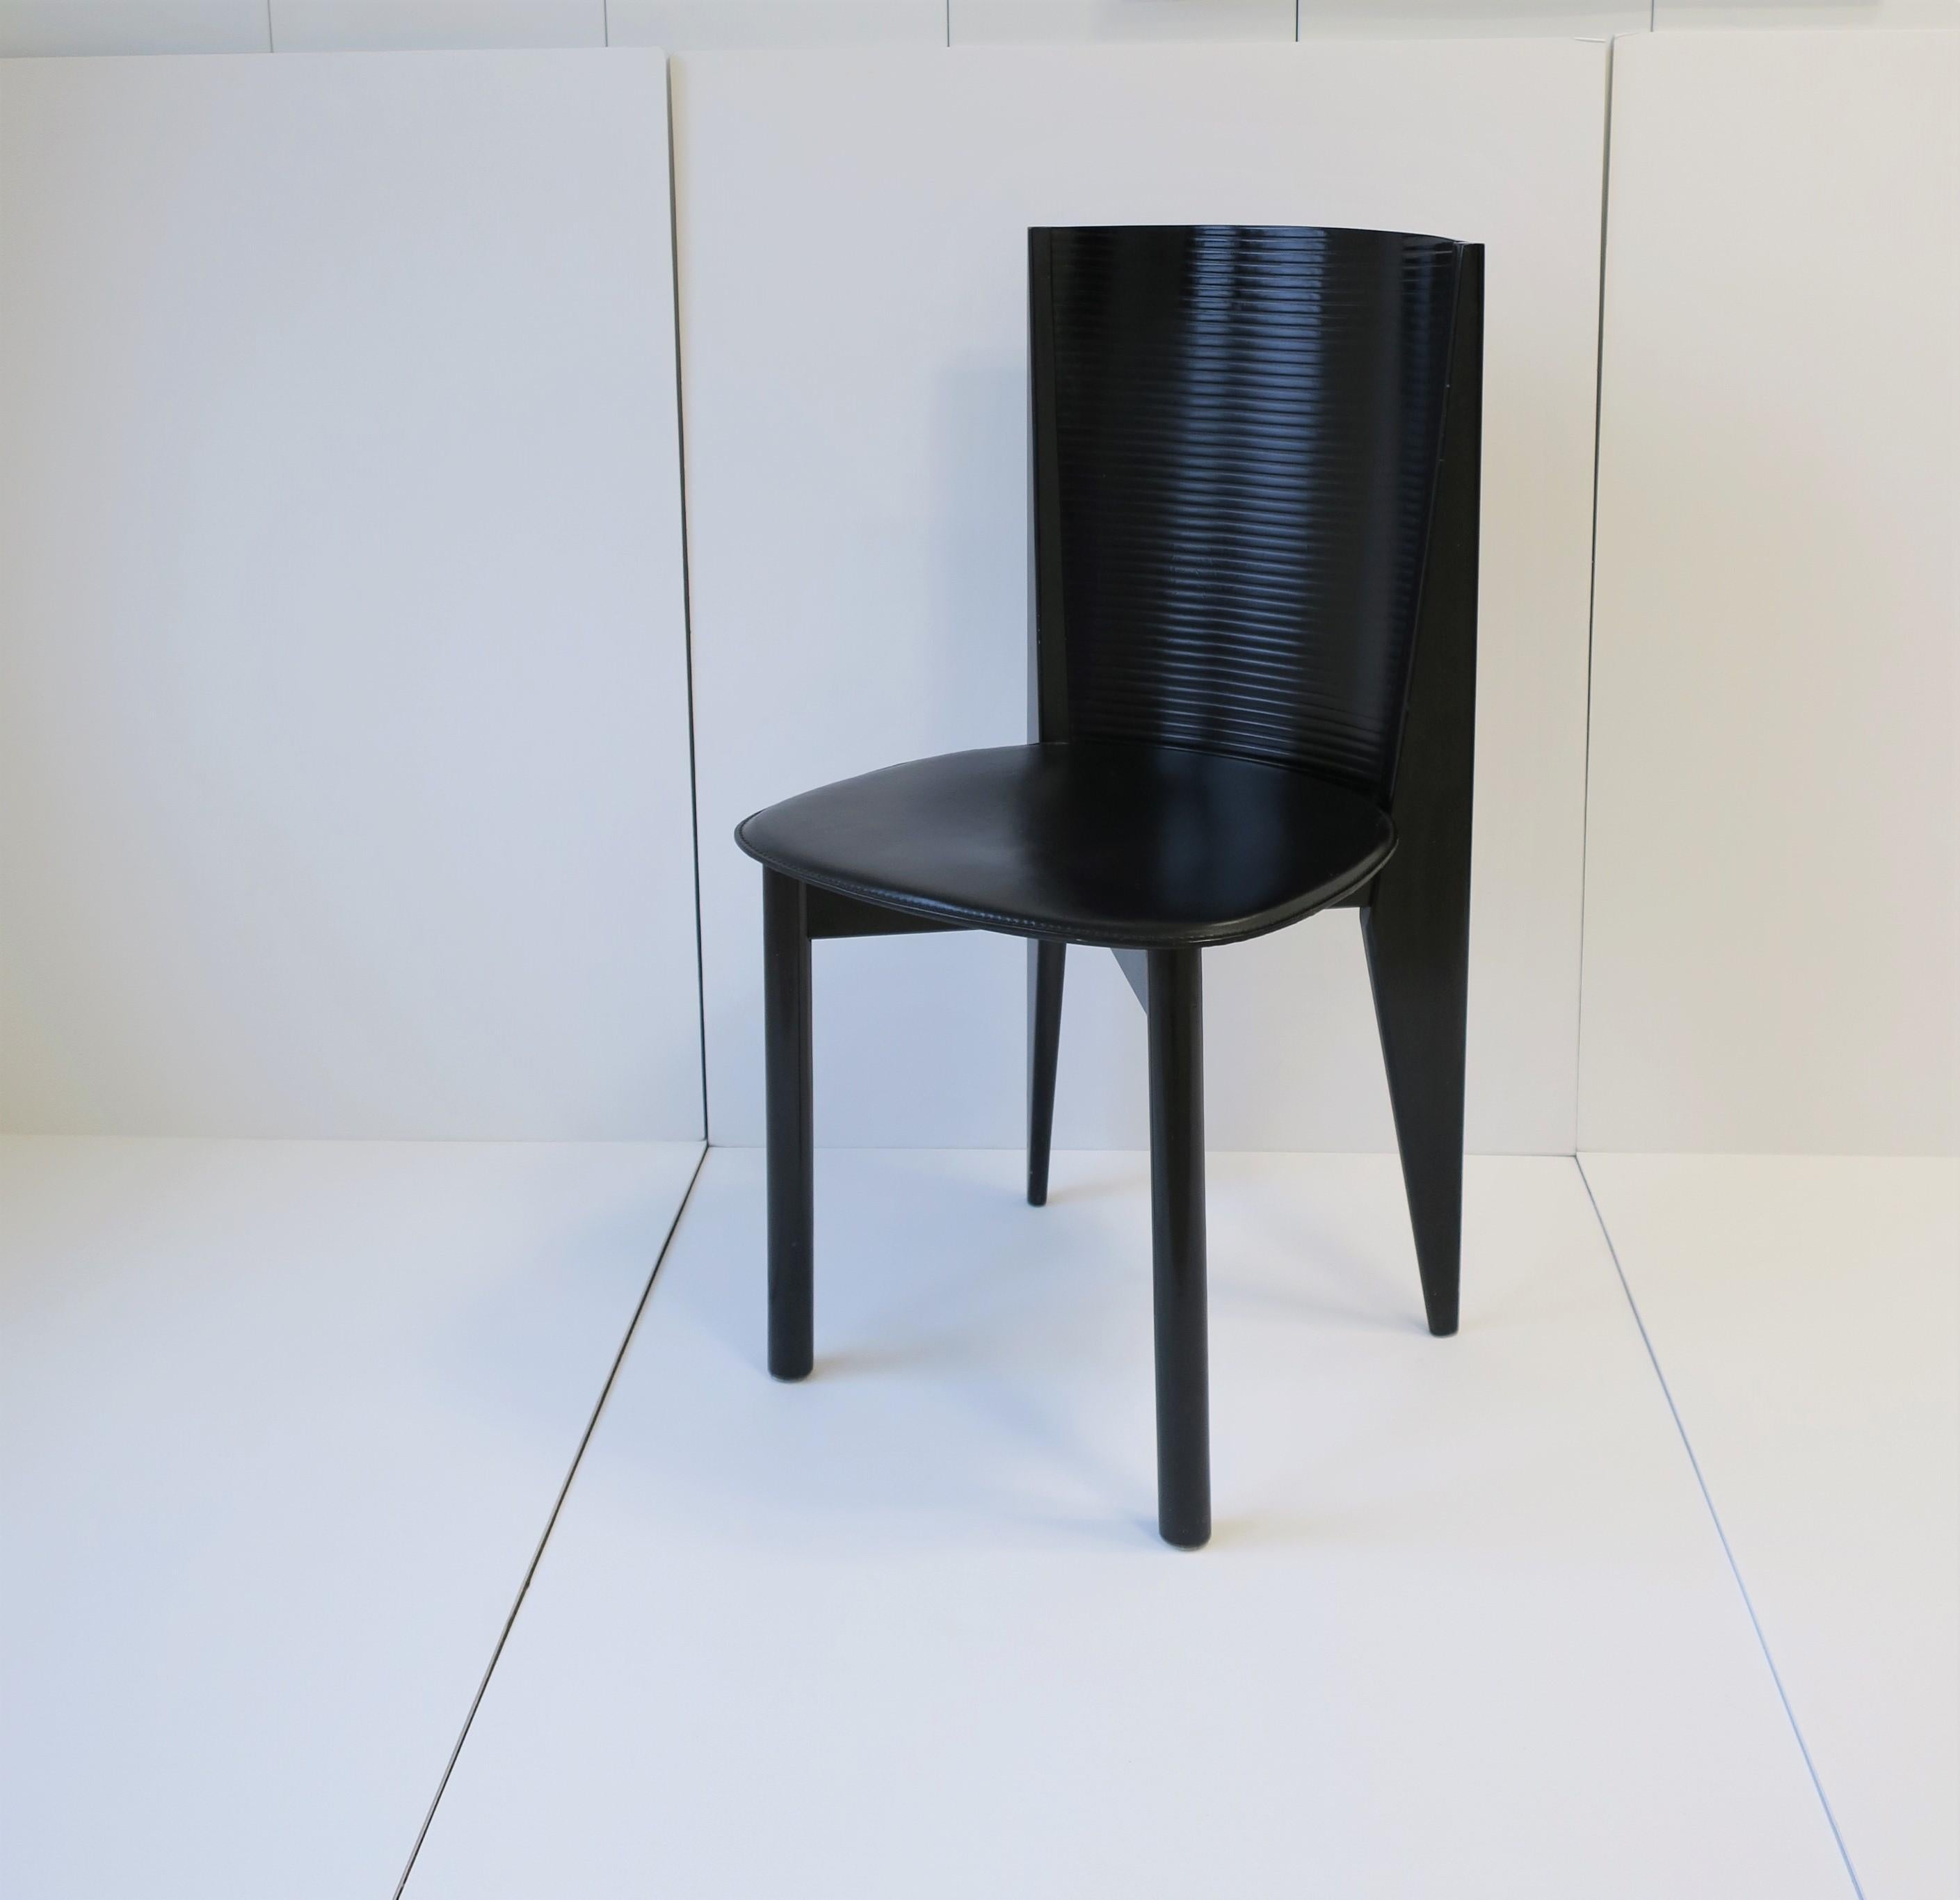 Very beautiful and chic Italian Modern style or Postmodern period black lacquer wood and leather side or desk chair(s), circa late-20th century, late-1970s-1980s, Italy. Beautiful detailing in chair legs and back. With maker's mark on bottom: